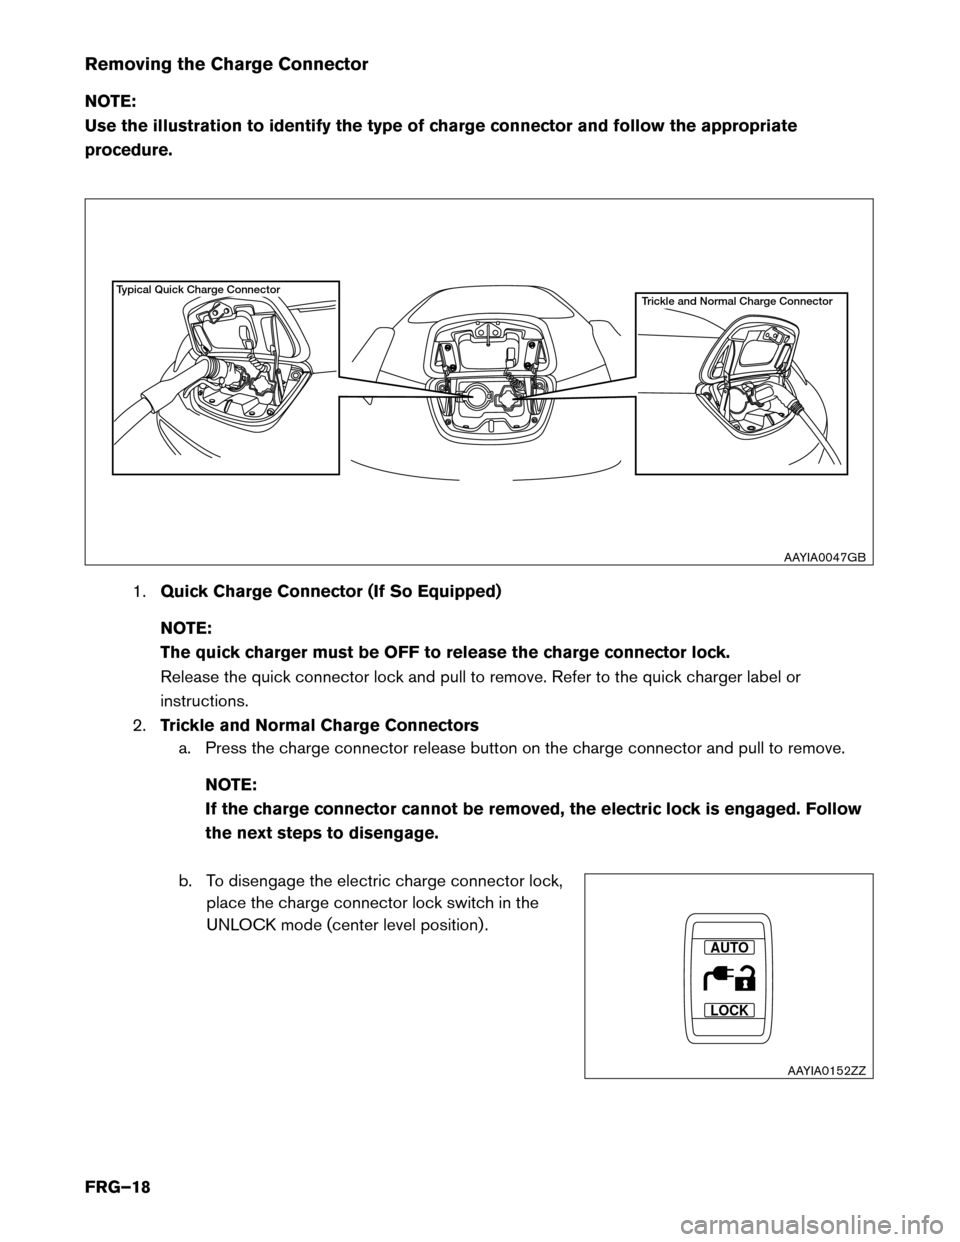 NISSAN LEAF 2015 1.G First Responders Guide Removing the Charge Connector
NO
TE:
Use the illustration to identify the type of charge connector and follow the appropriate
procedure.
1.Quick Charge Connector (If So Equipped)
NOTE:
The quick charg